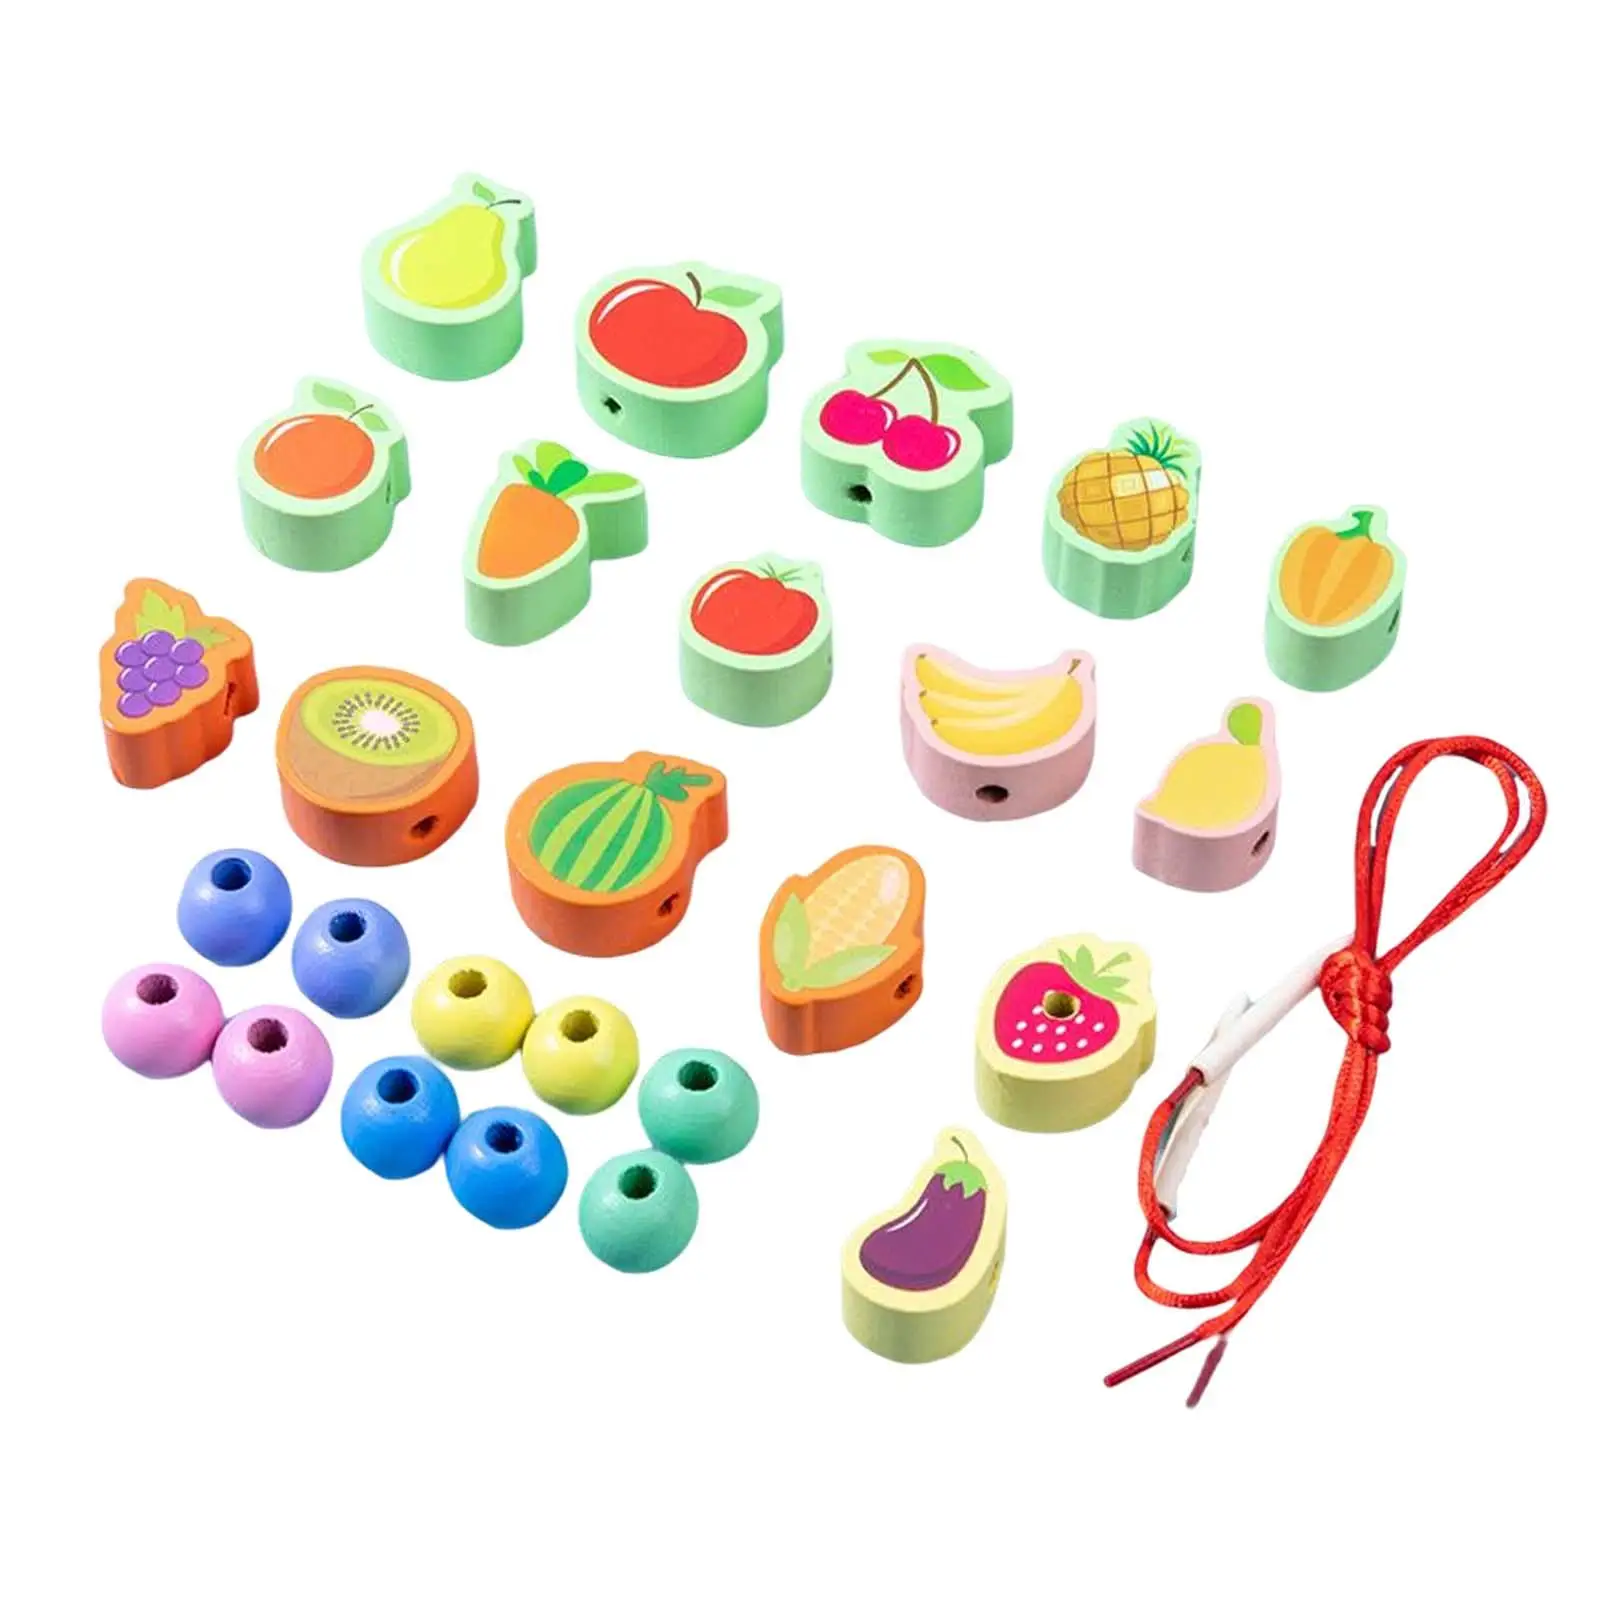 Wooden Lacing Beads Set Wooden Crafts Threading Toys for Educational Gifts